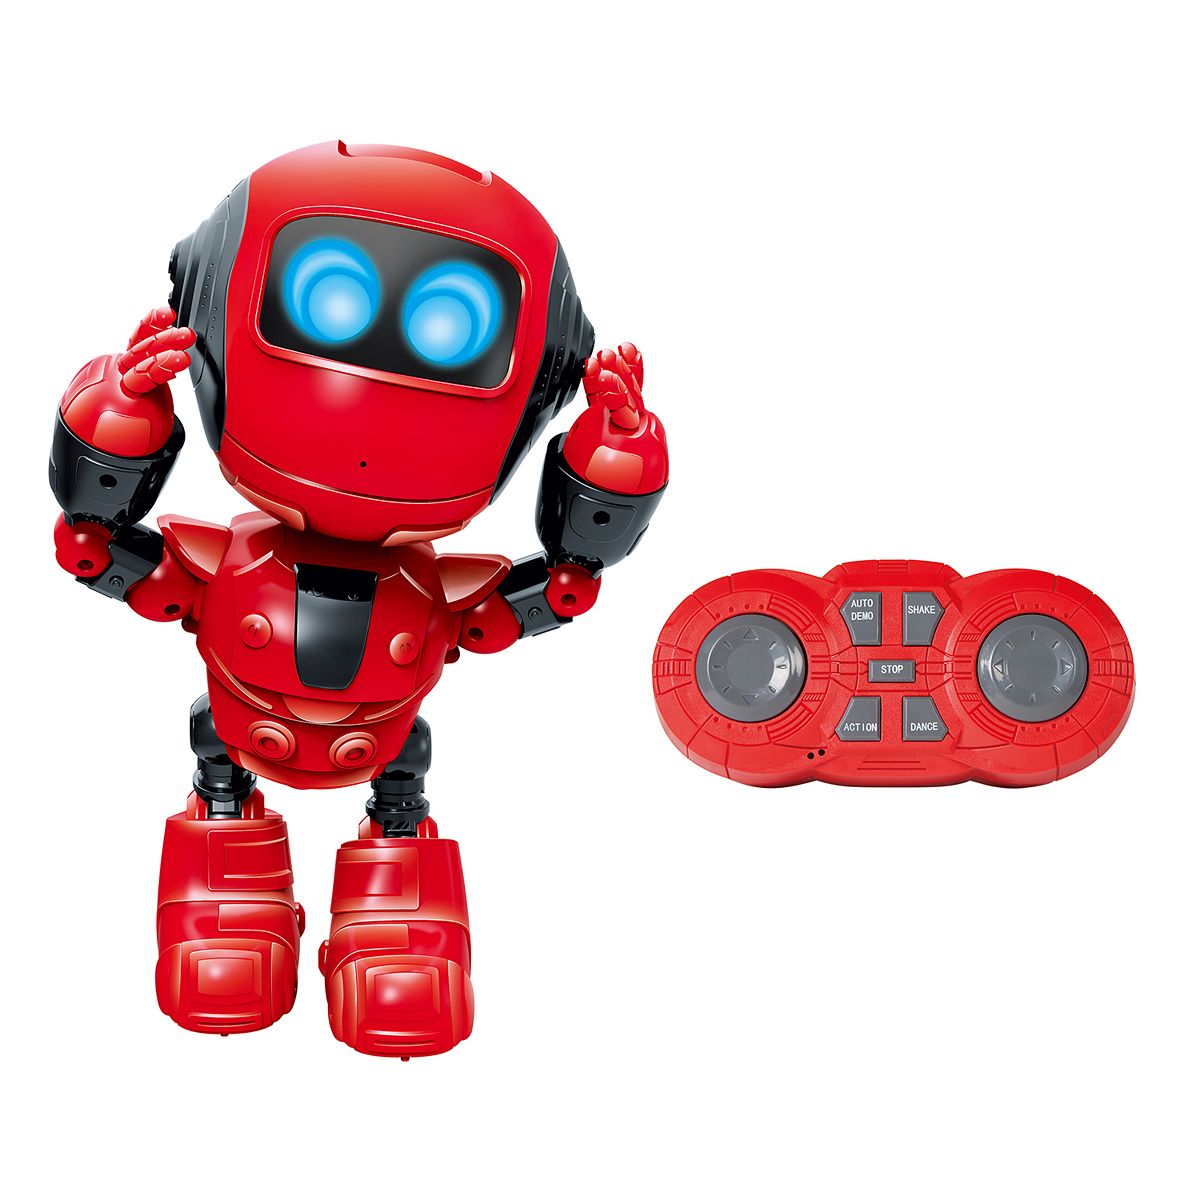  The Coding Bot - STEM Educational Toy Robot for Kids